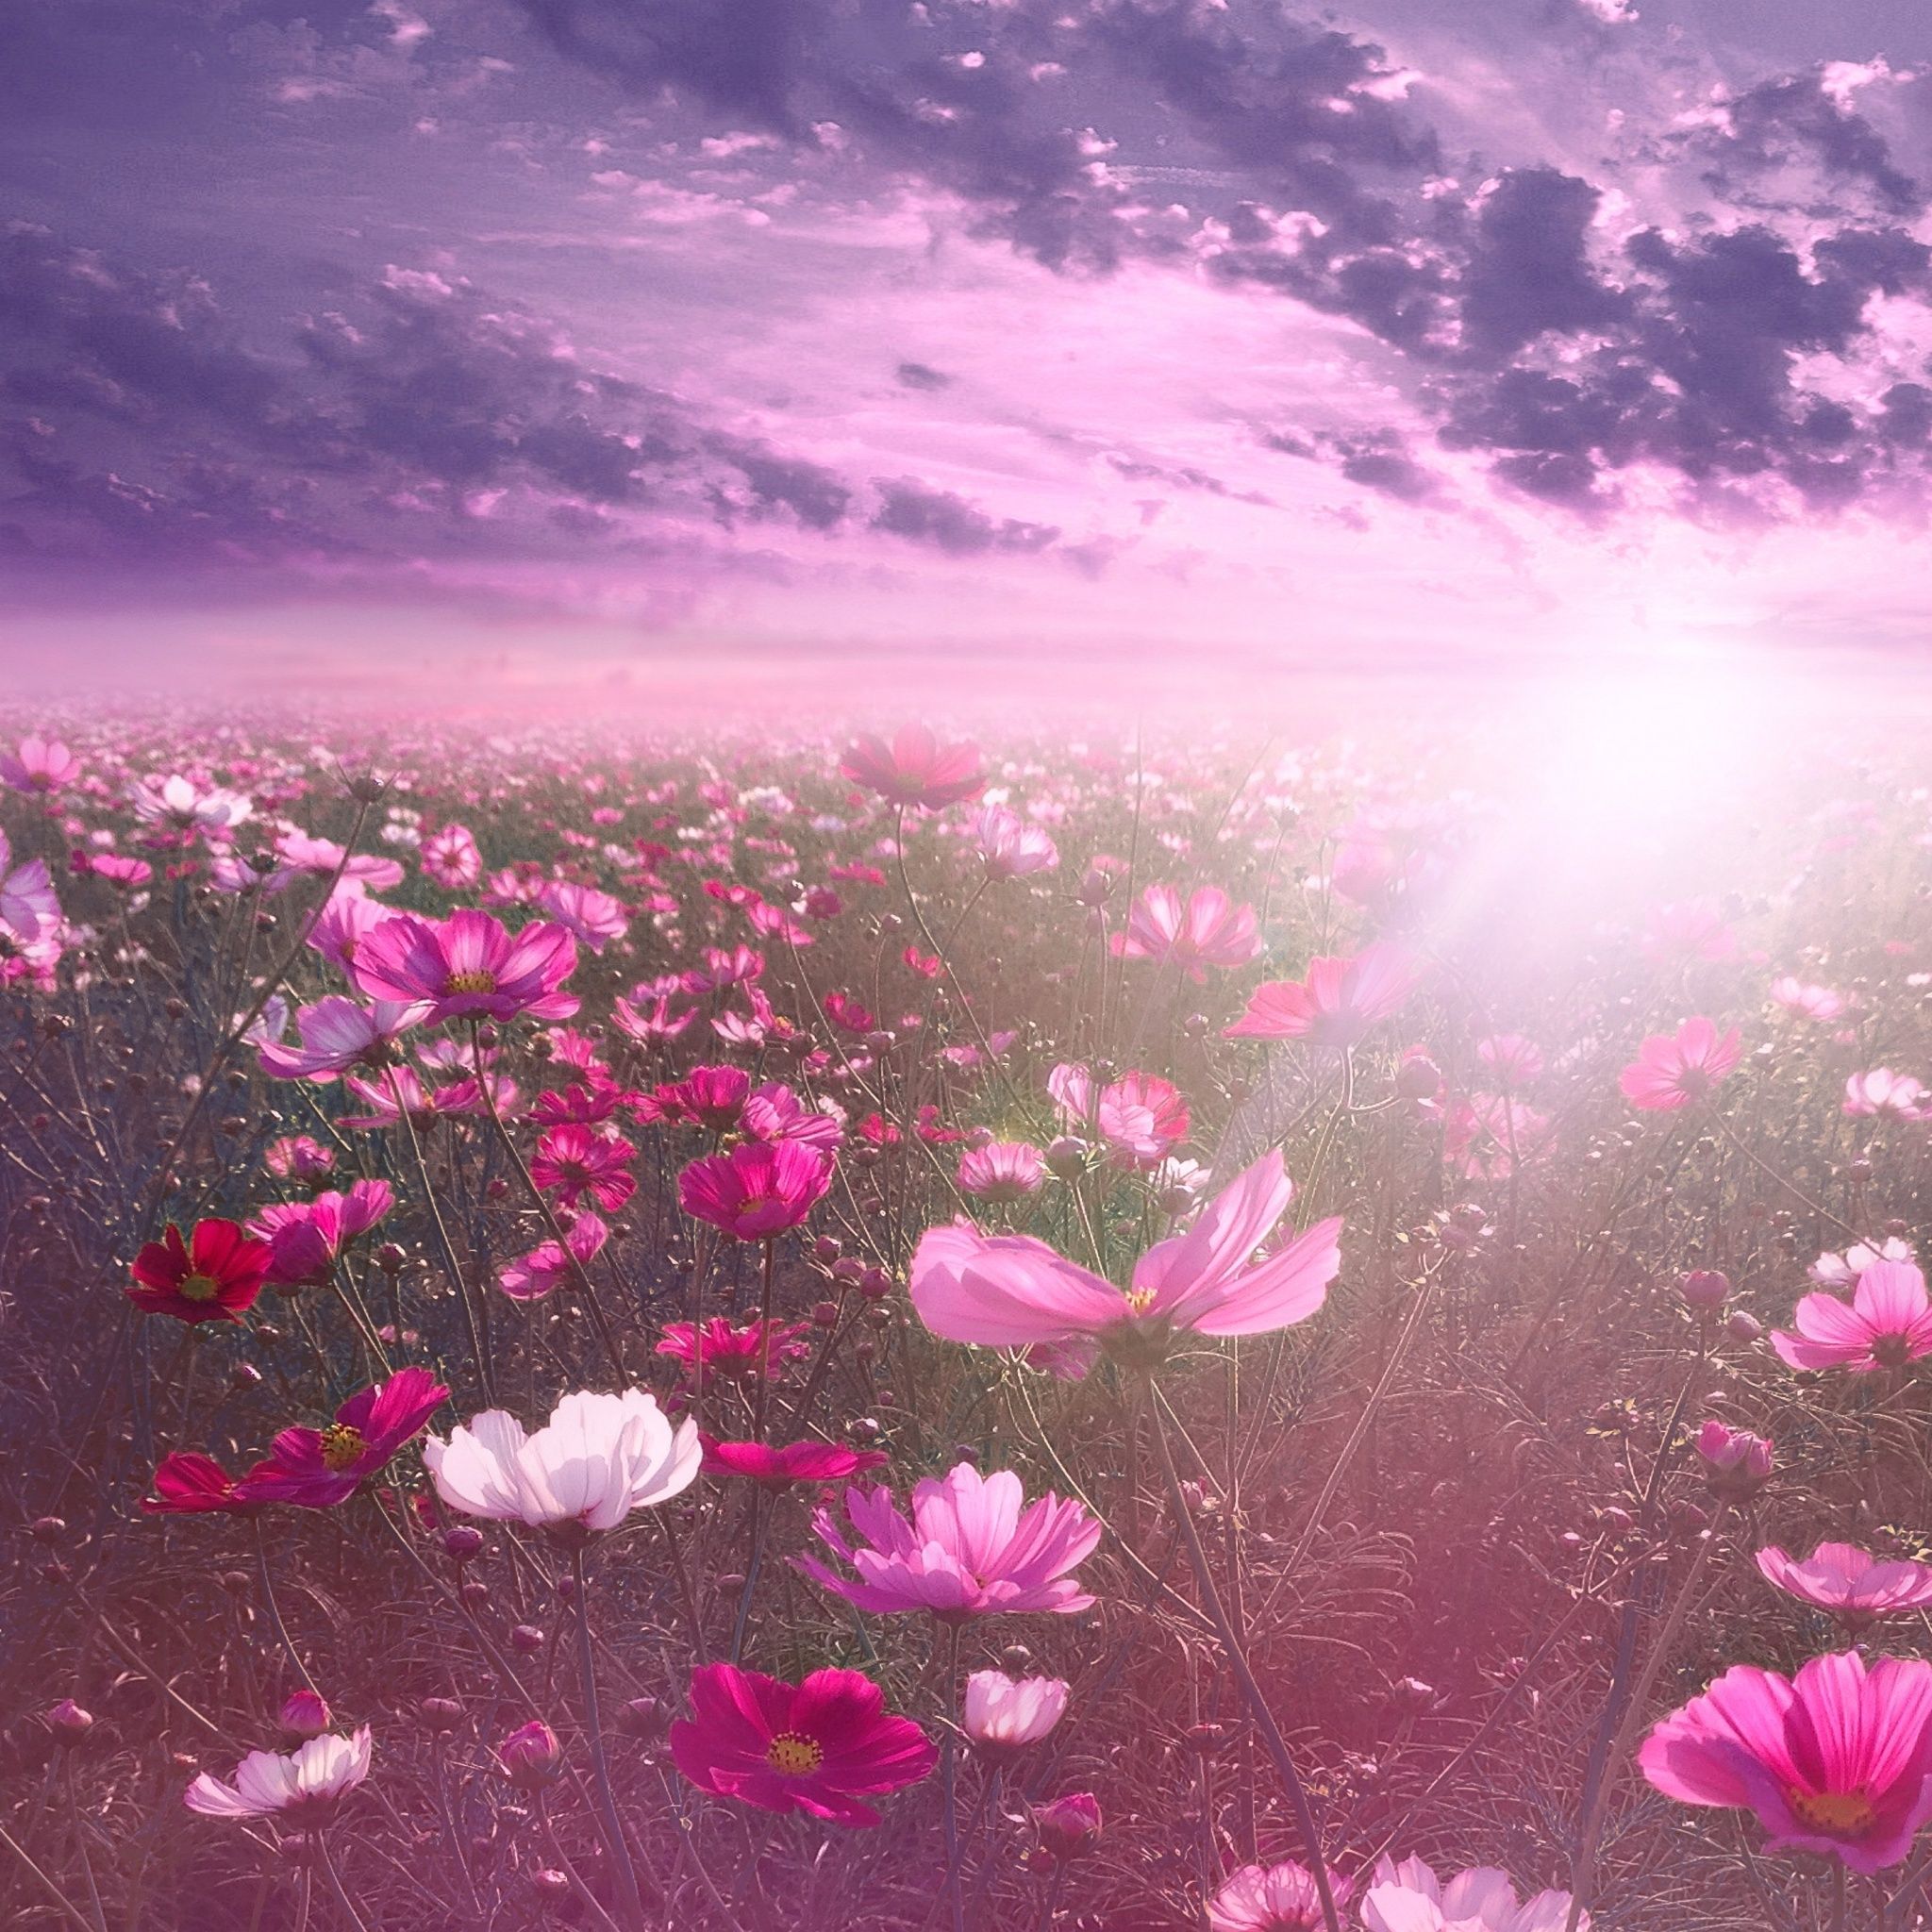 A field of pink flowers with the sun shining through - Garden, flower, nature